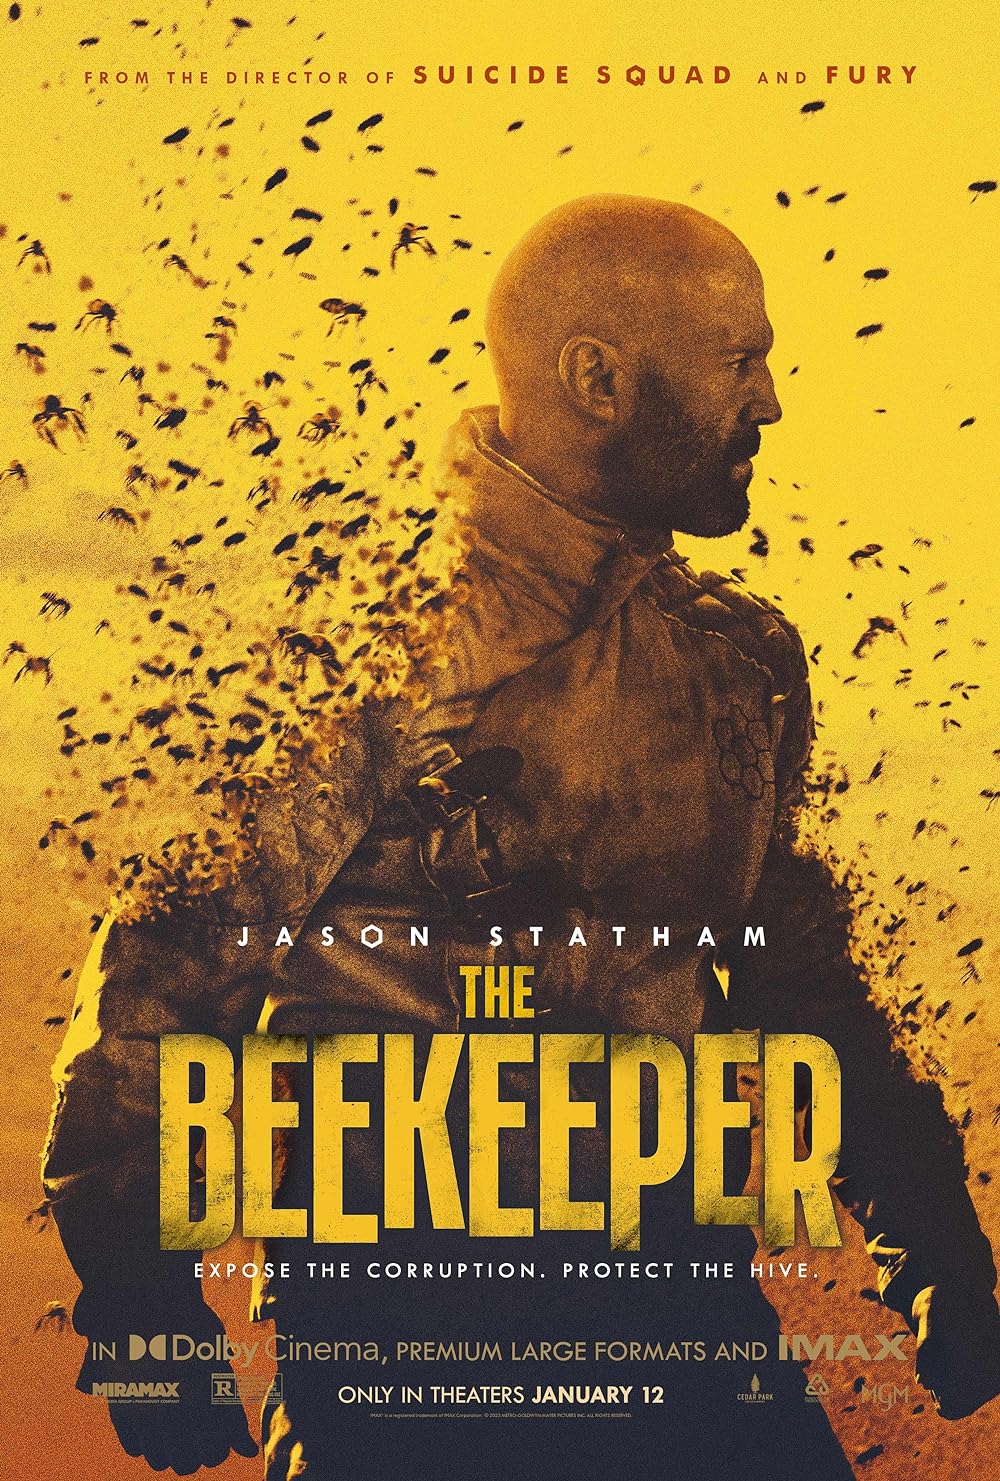 The Beekeeper (April 26, Lionsgate Play)Brace yourself for intense action in 